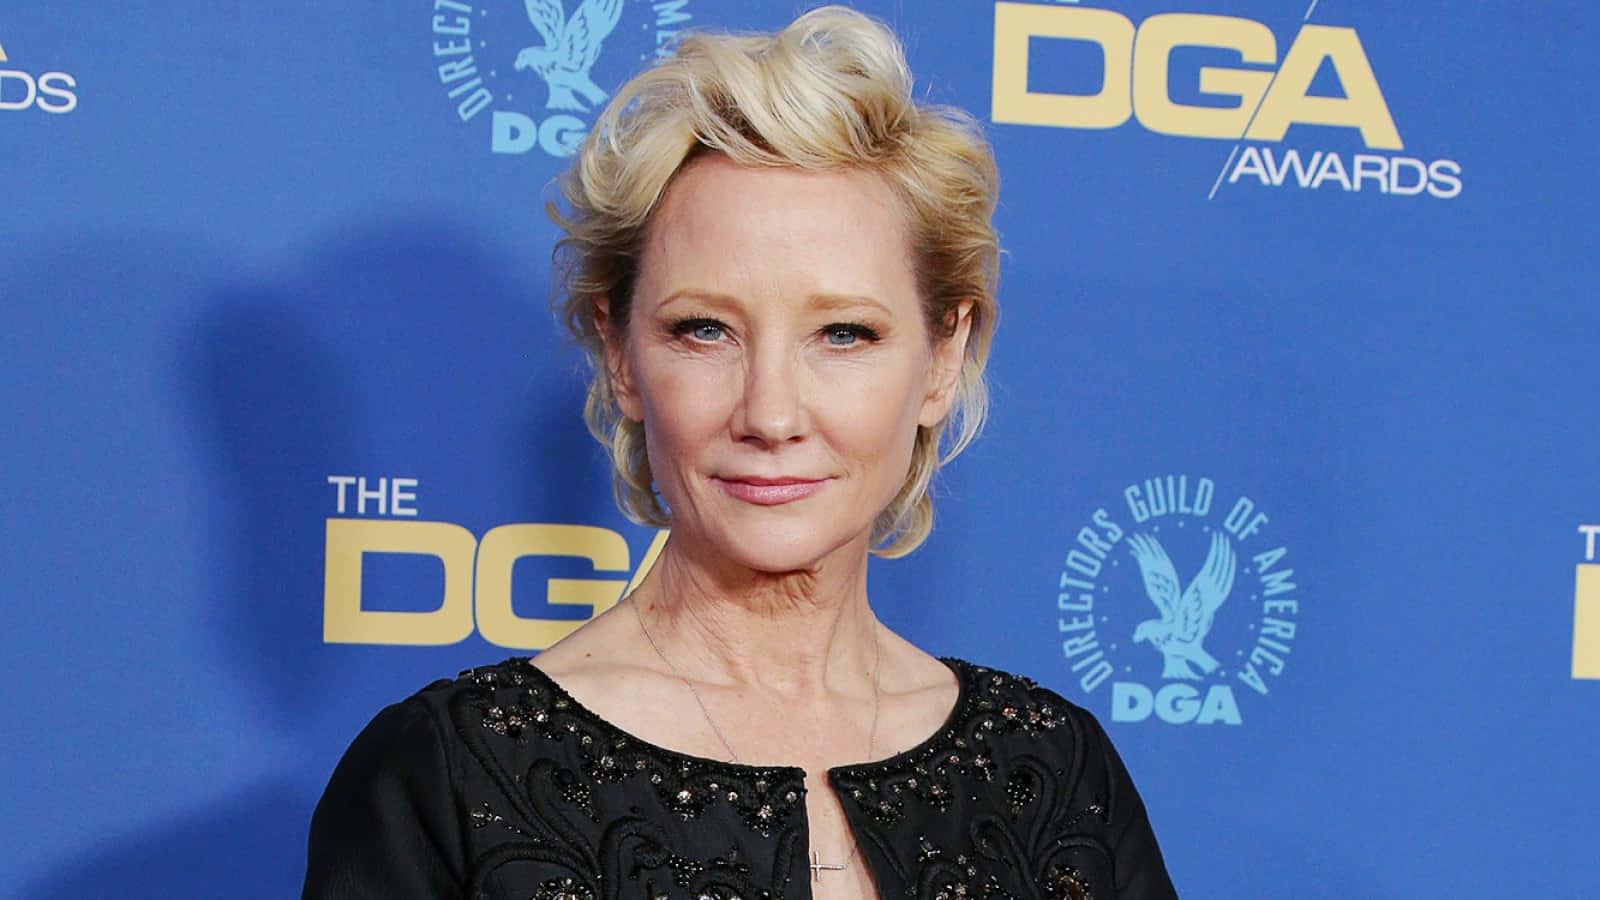 Swedishtranslation: Anne Heche Vid Dga Awards. (note: This Sentence Would Make Sense As A Title For A Wallpaper Featuring Anne Heche At The Dga Awards.) Wallpaper